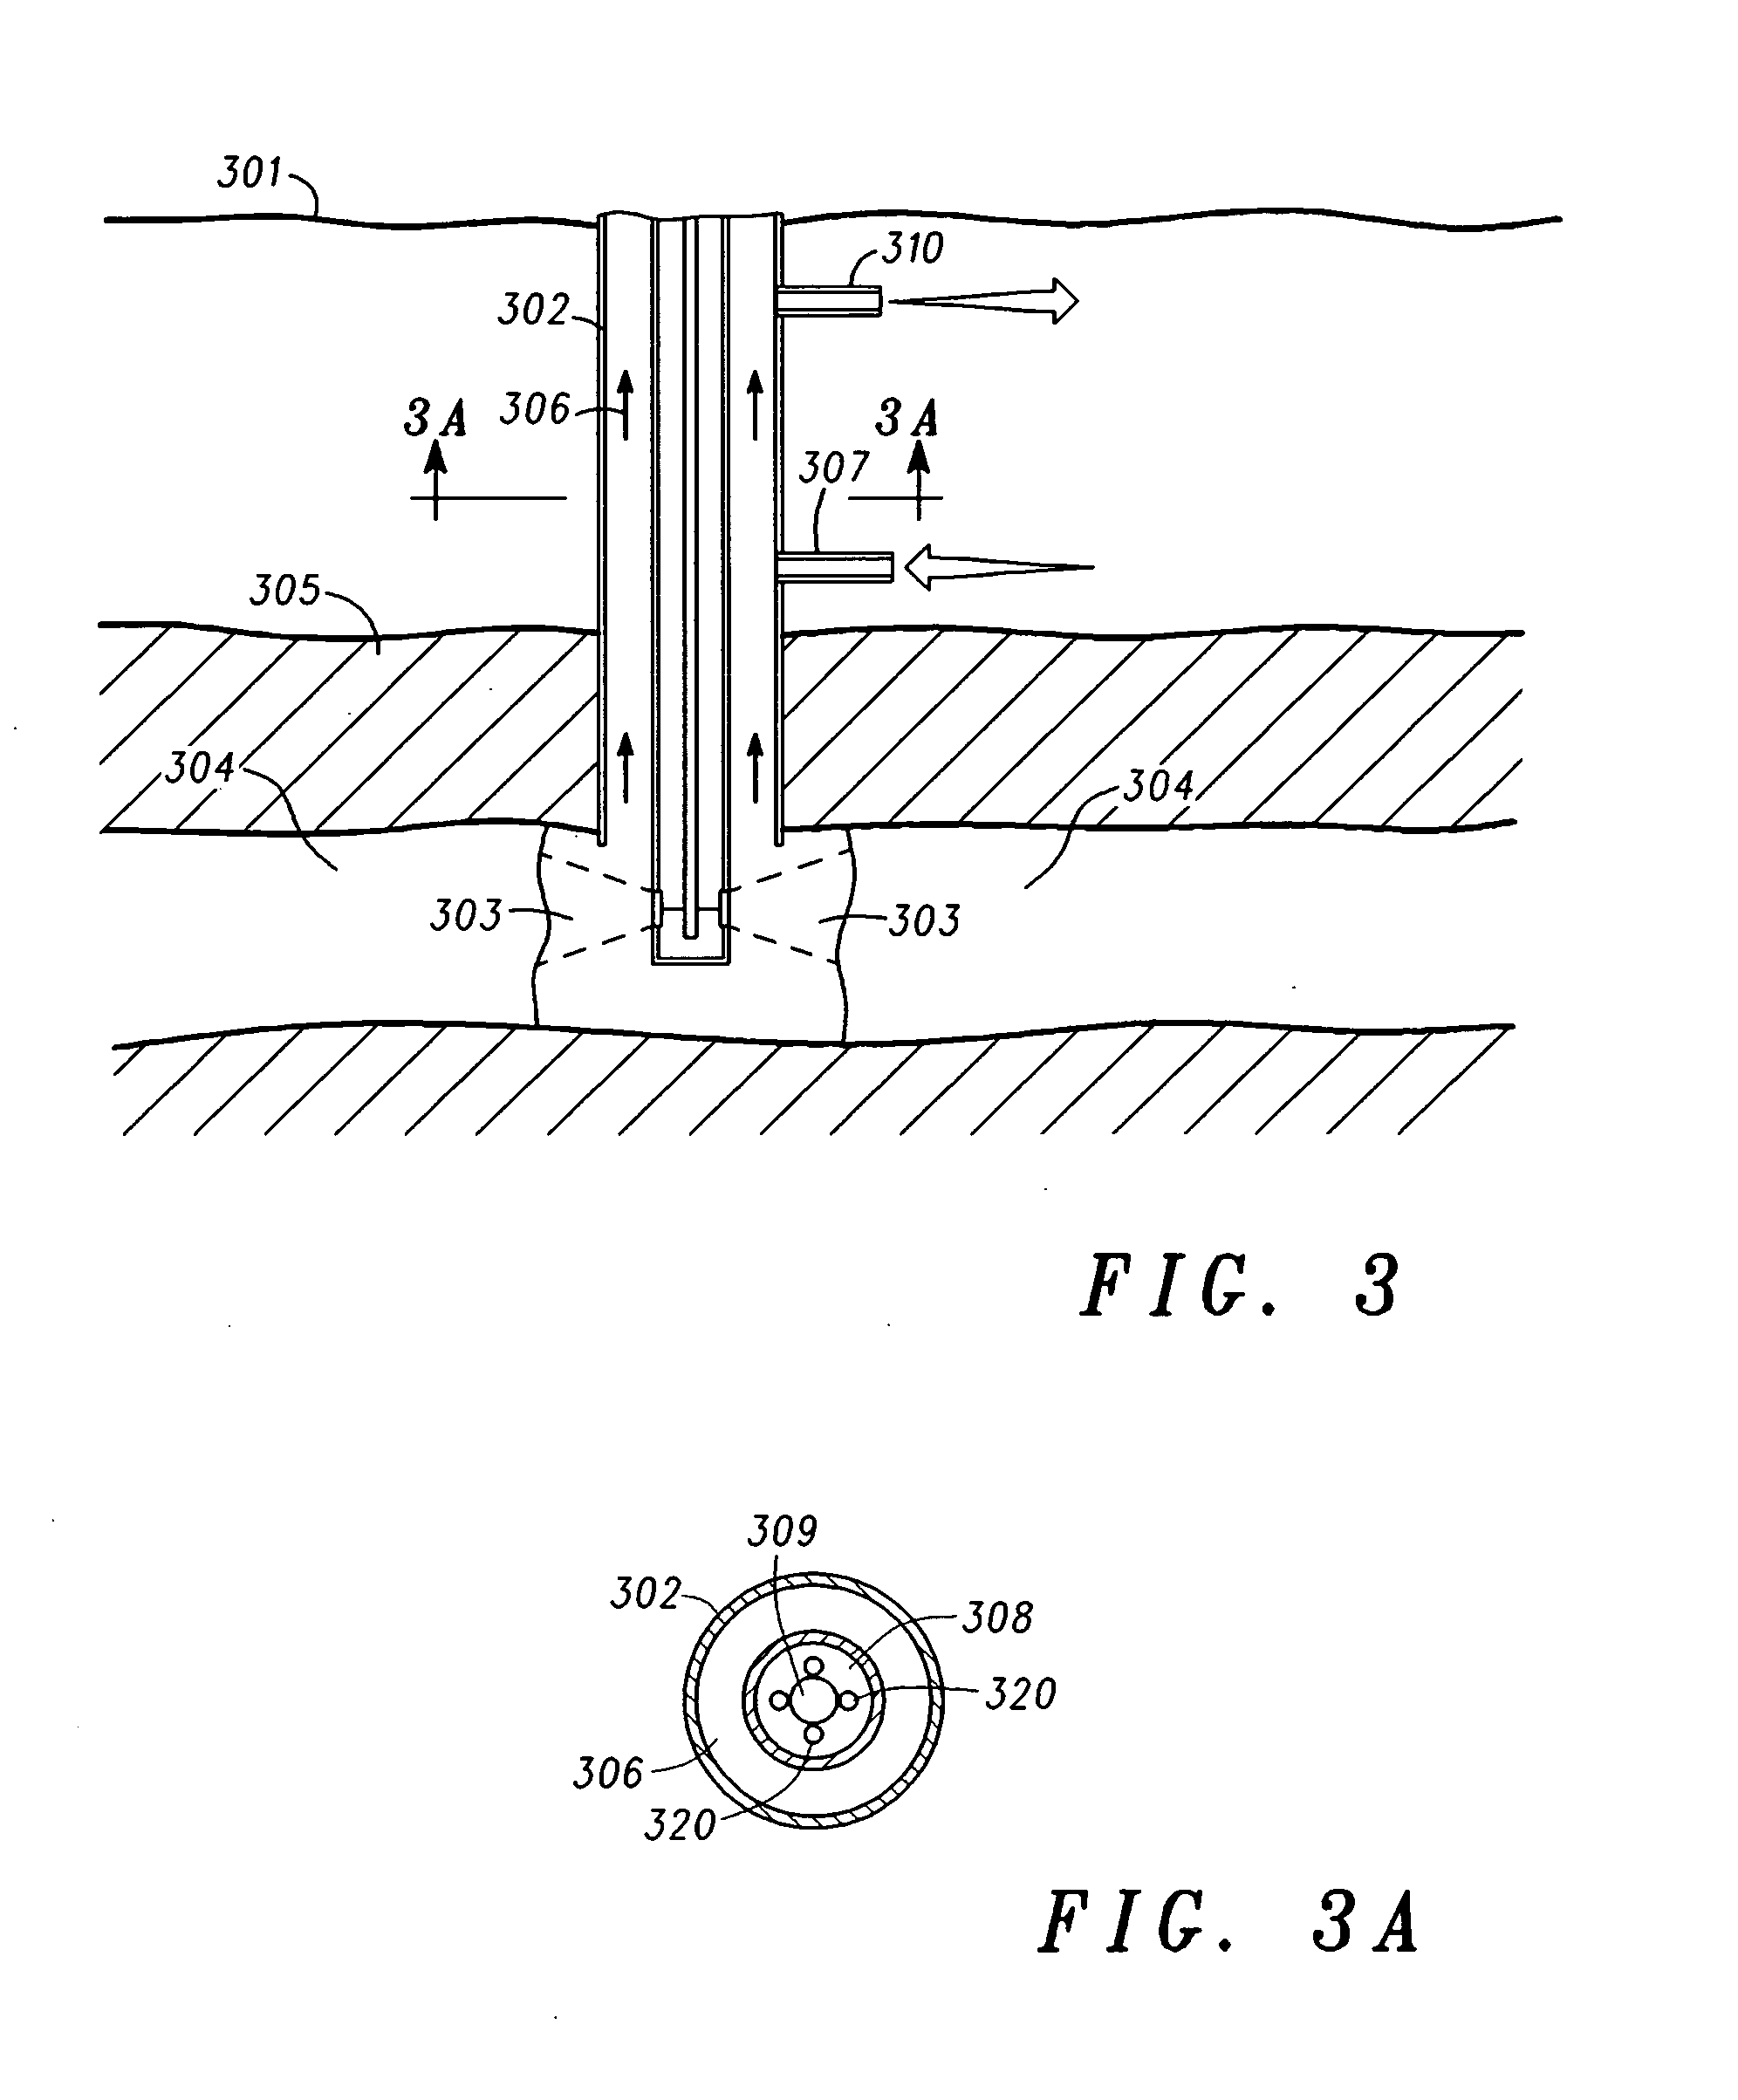 Methane extraction method and apparatus using high-energy diode lasers or diode-pumped solid state lasers